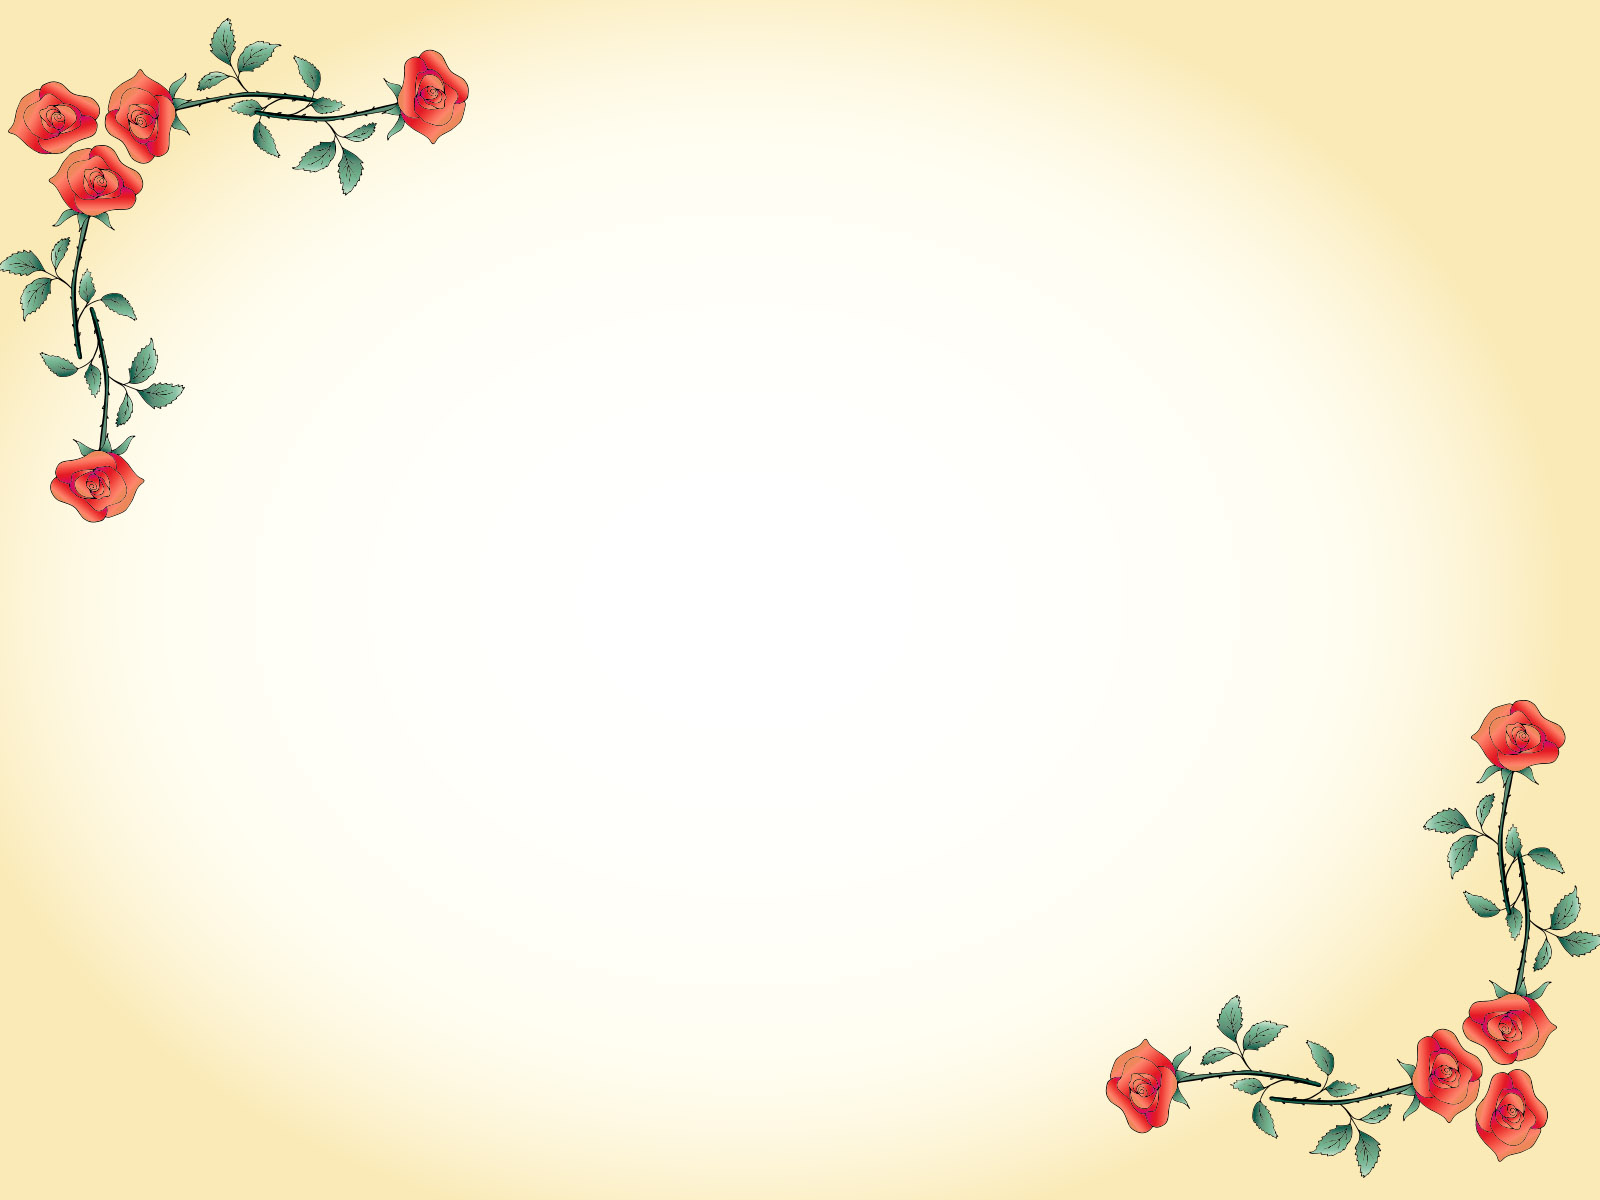 Flowers Powerpoint Templates - Free PPT Backgrounds and Templates